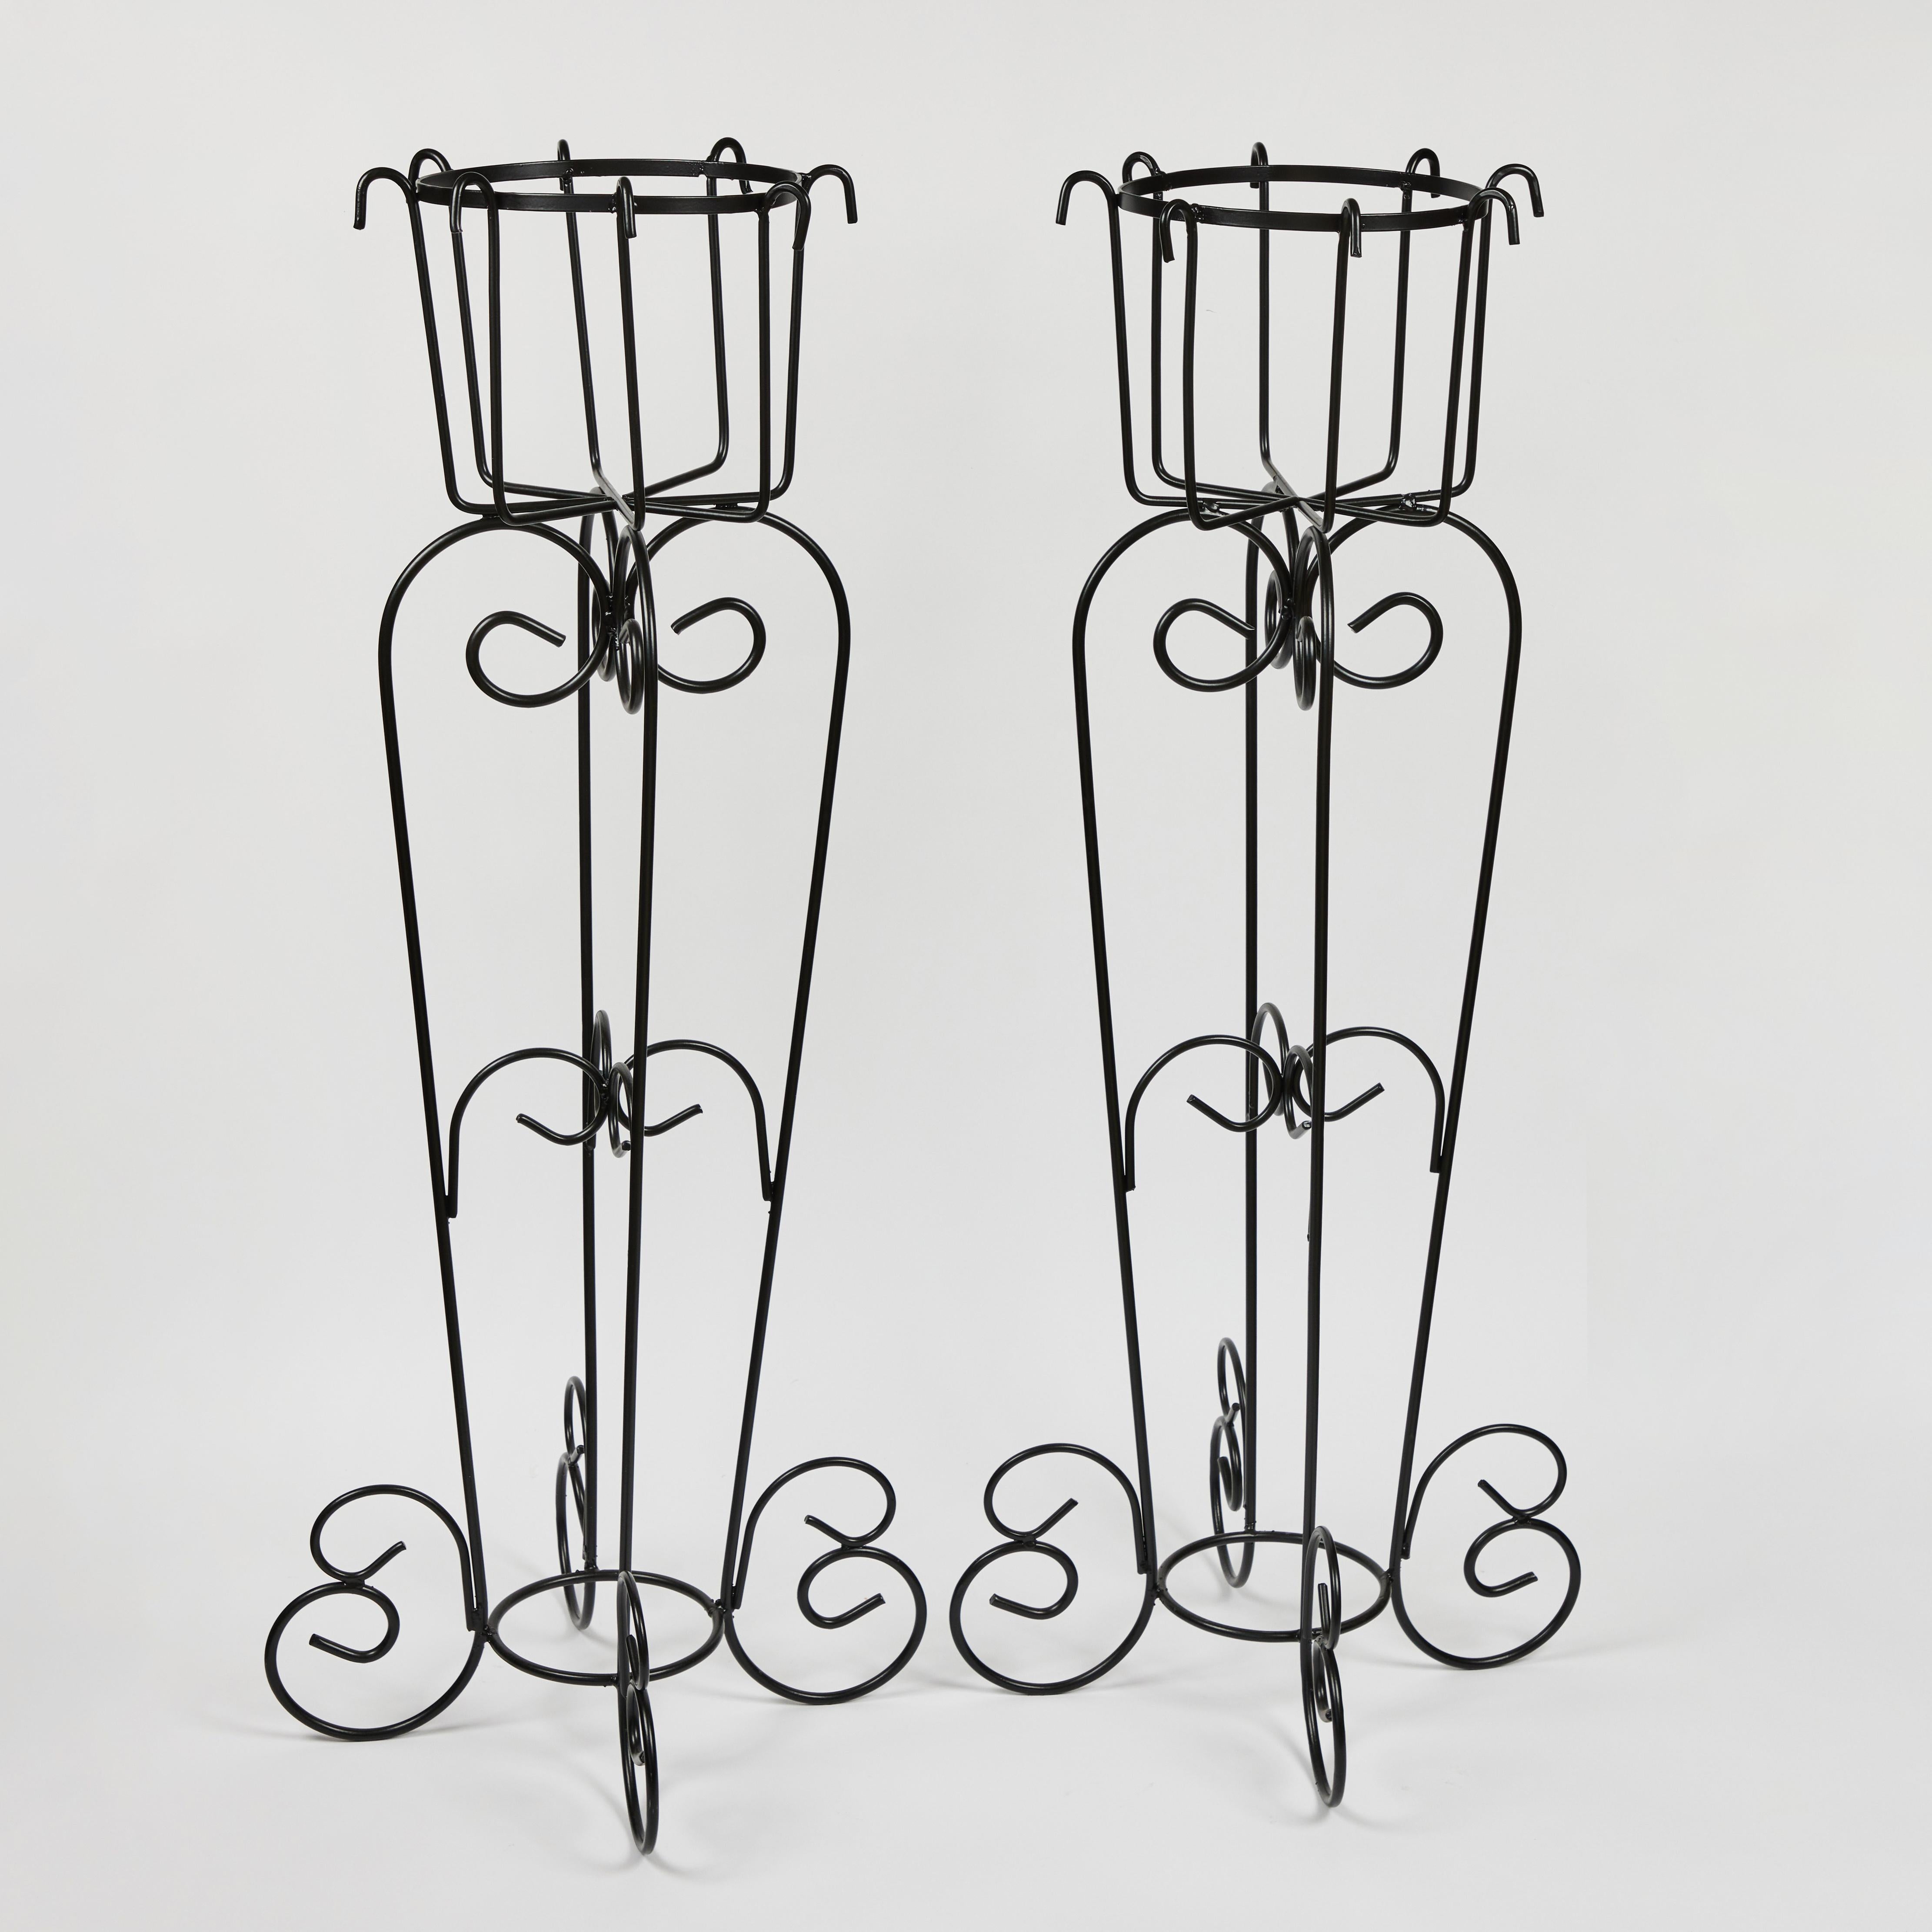 Splendid pair of tall vintage iron plant stands that have been newly powder coated in a rich black finish. They have a wonderfully robust presence even though they are airy and light with a repeating scroll design throughout.